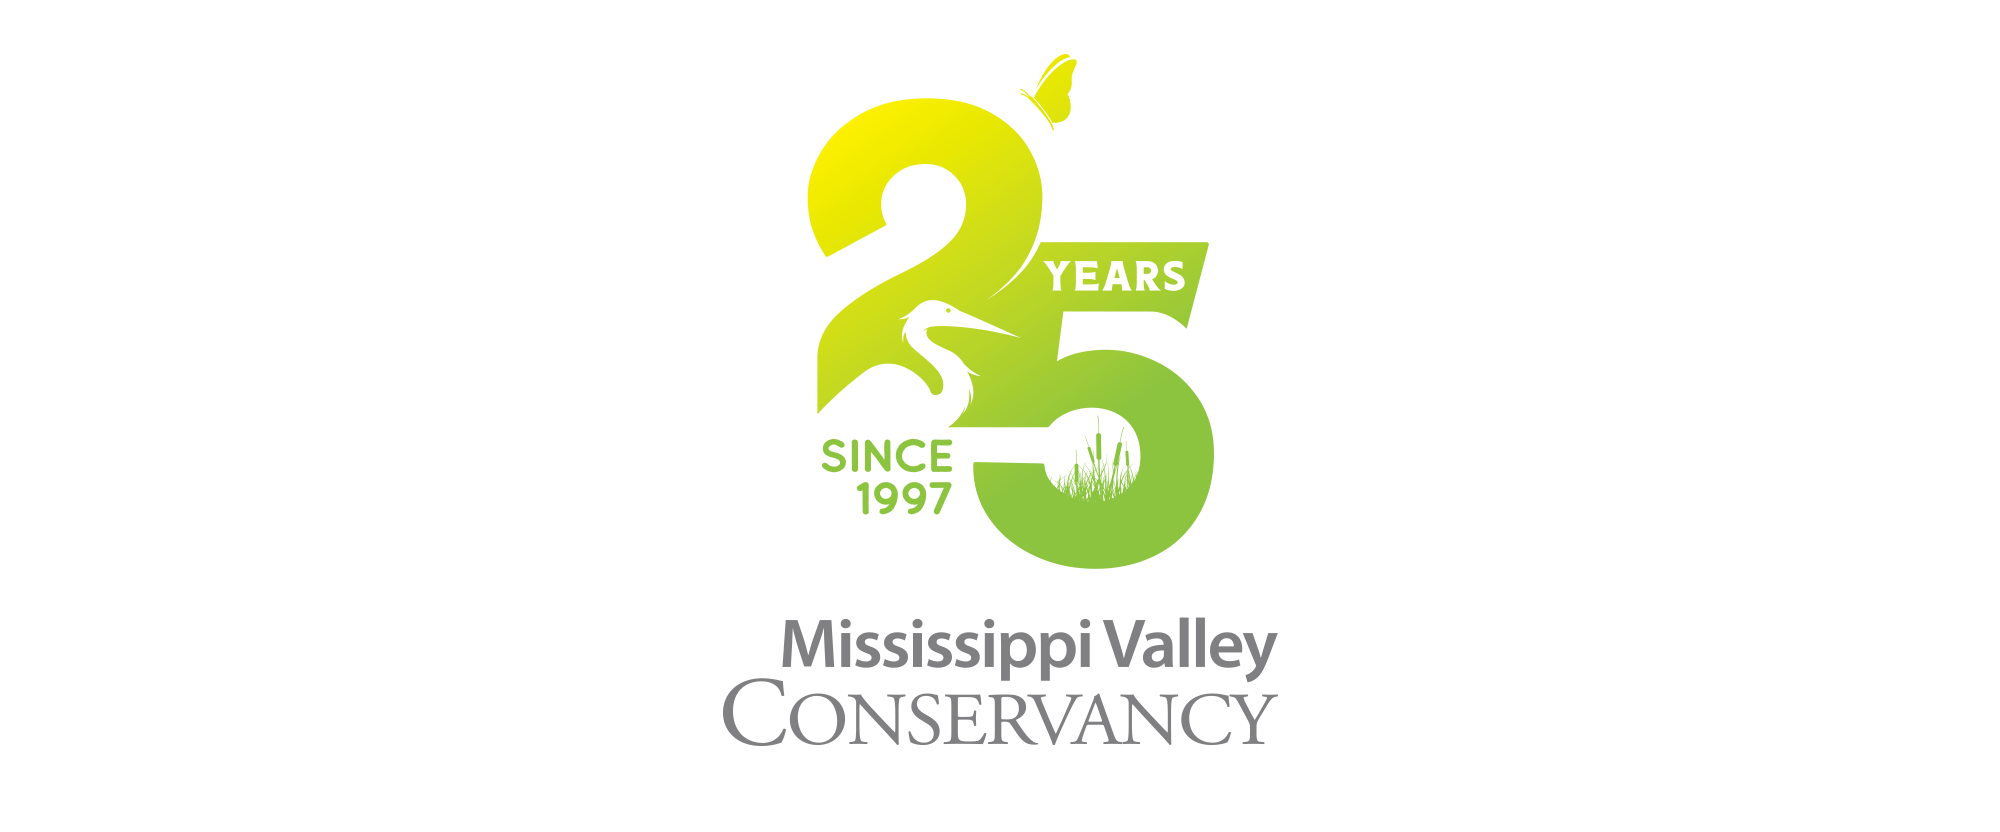 Four-color Mississippi Valley Conservancy 25-year anniversary logo with white background created by Vendi Advertising